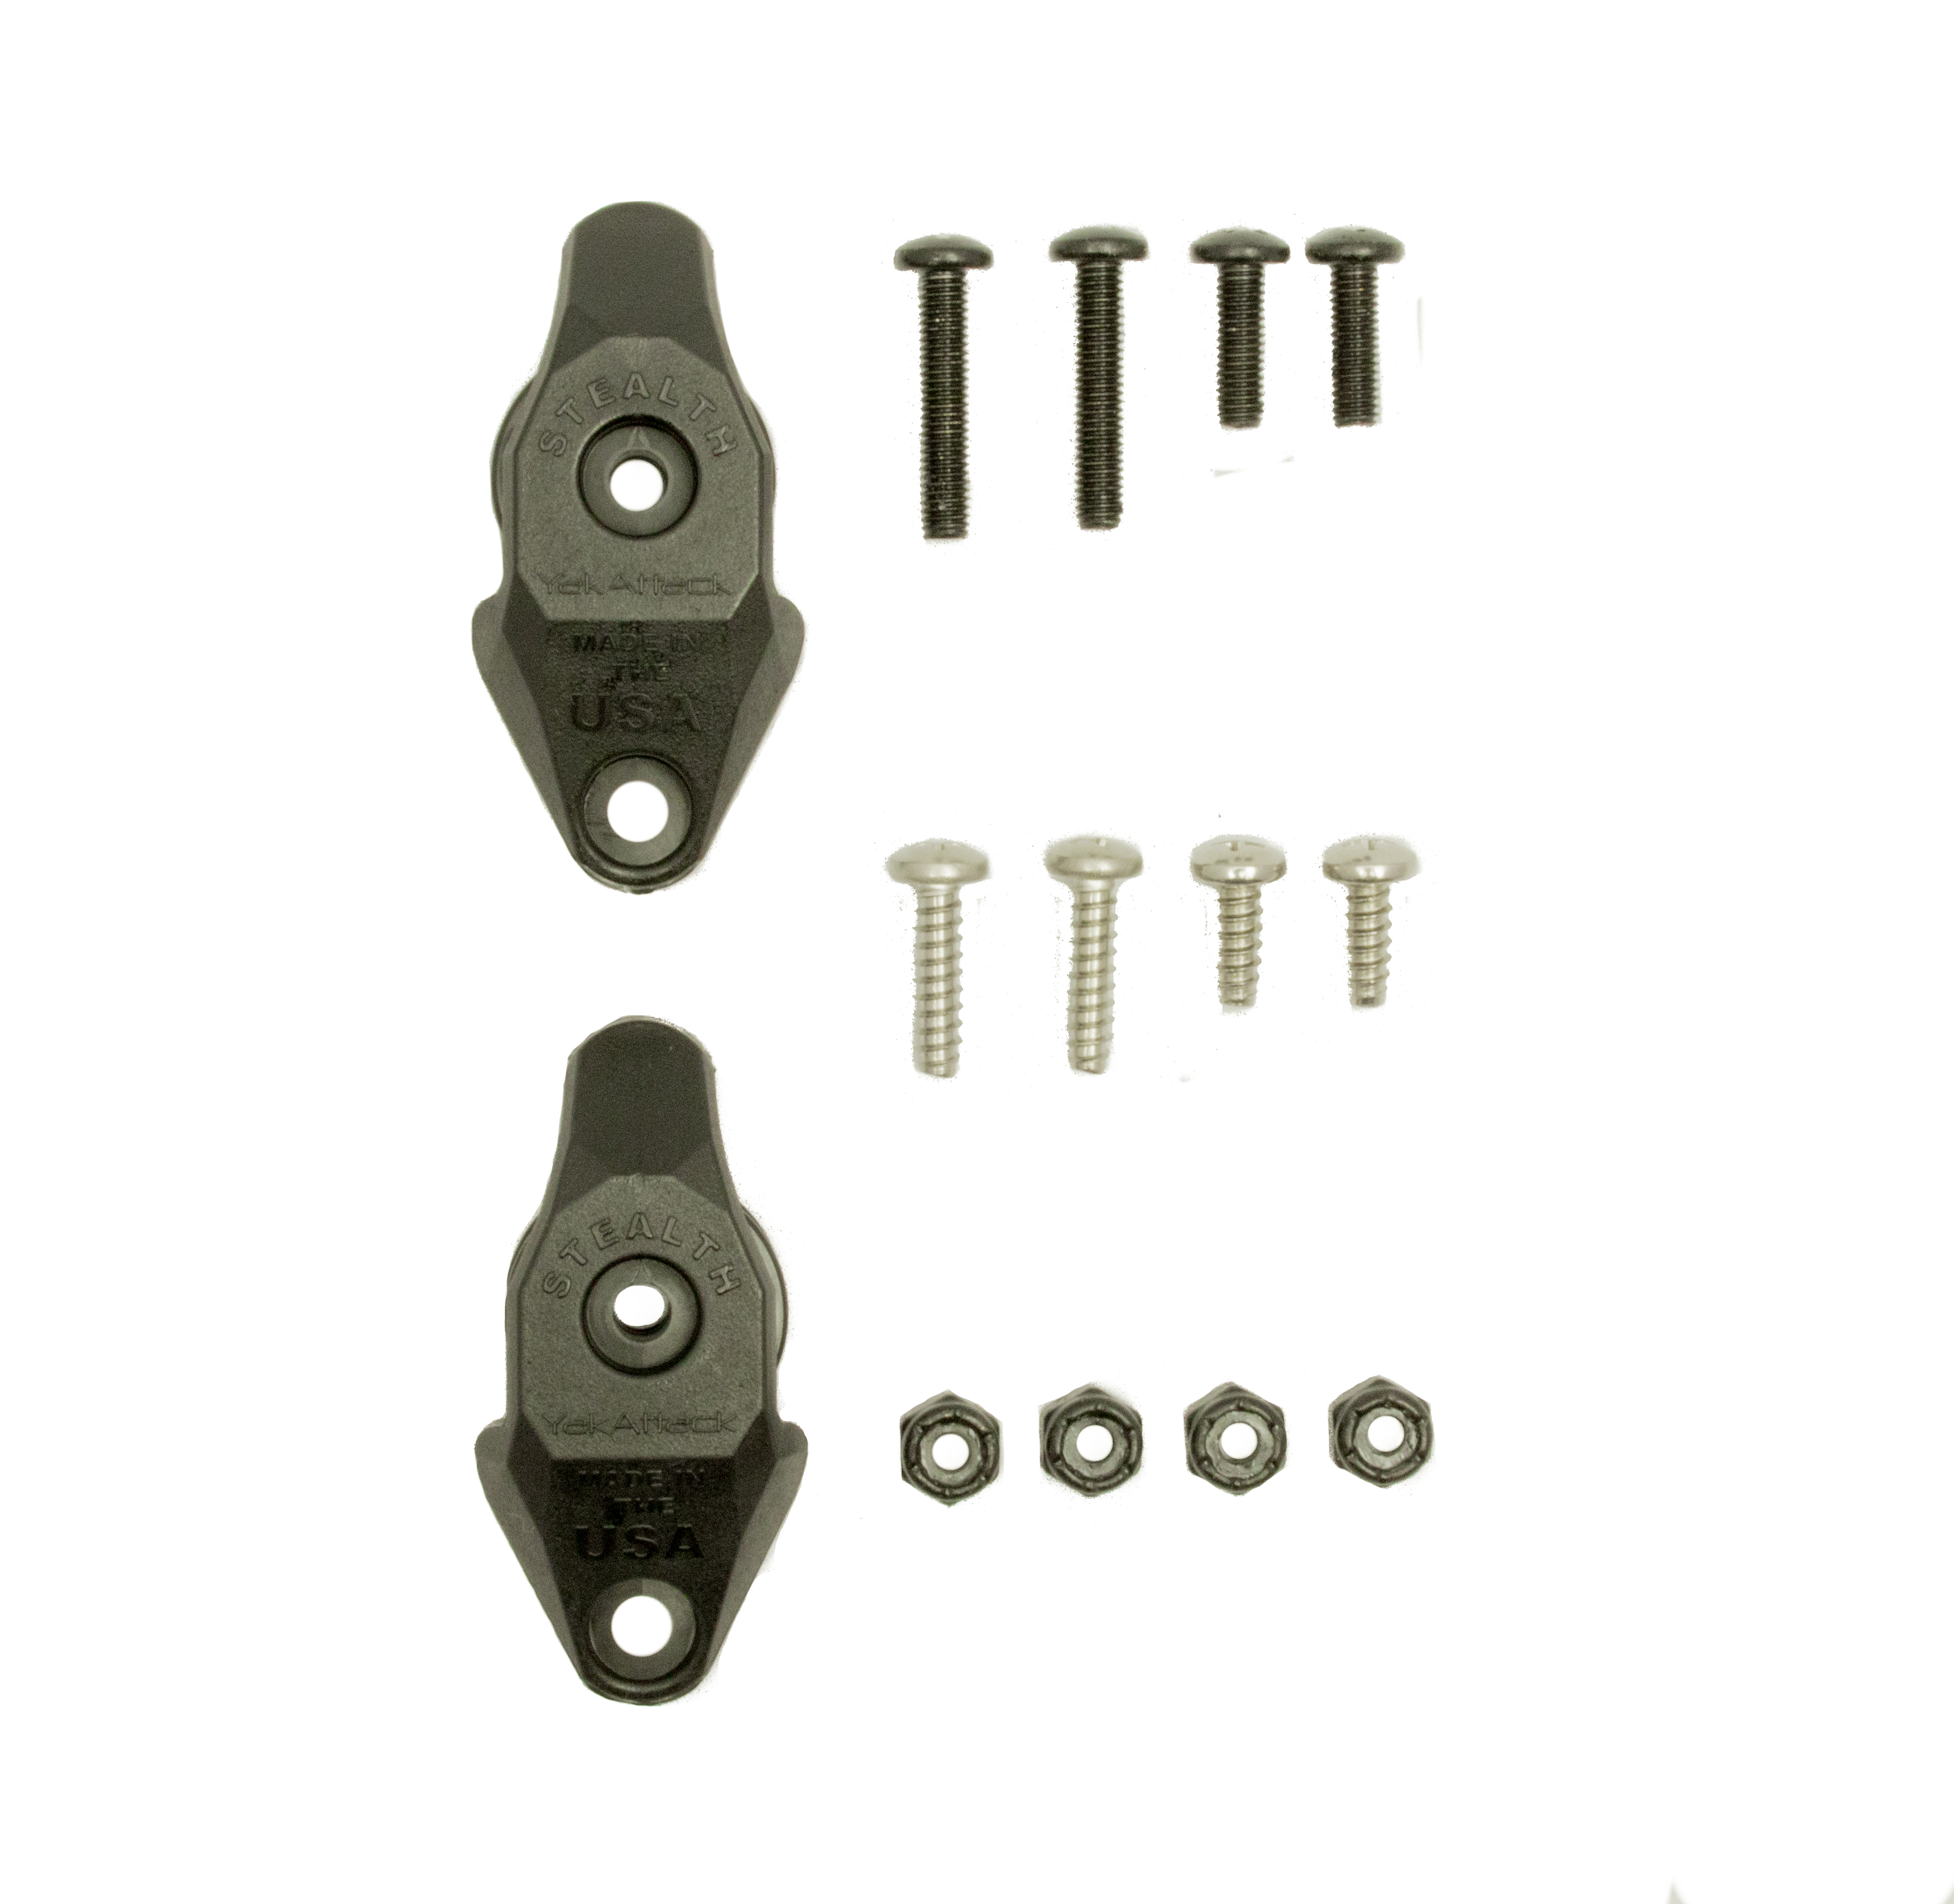 yakattack-stealth-pulley-2-pack-with-hardware-ams-1011.jpg